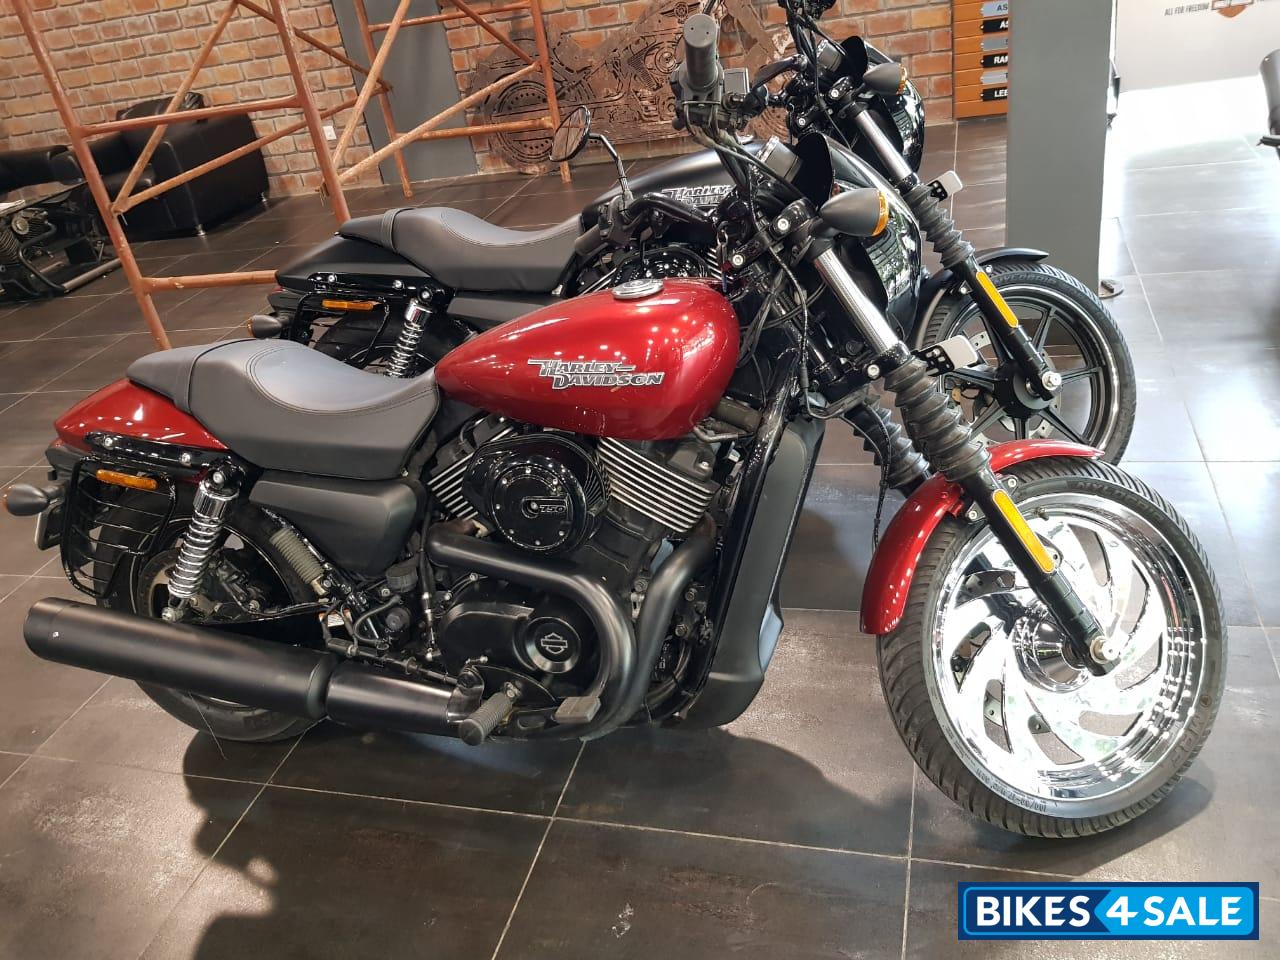 Used 2018 Model Harley Davidson Street 750 For Sale In Indore Id 188893 Bikes4sale